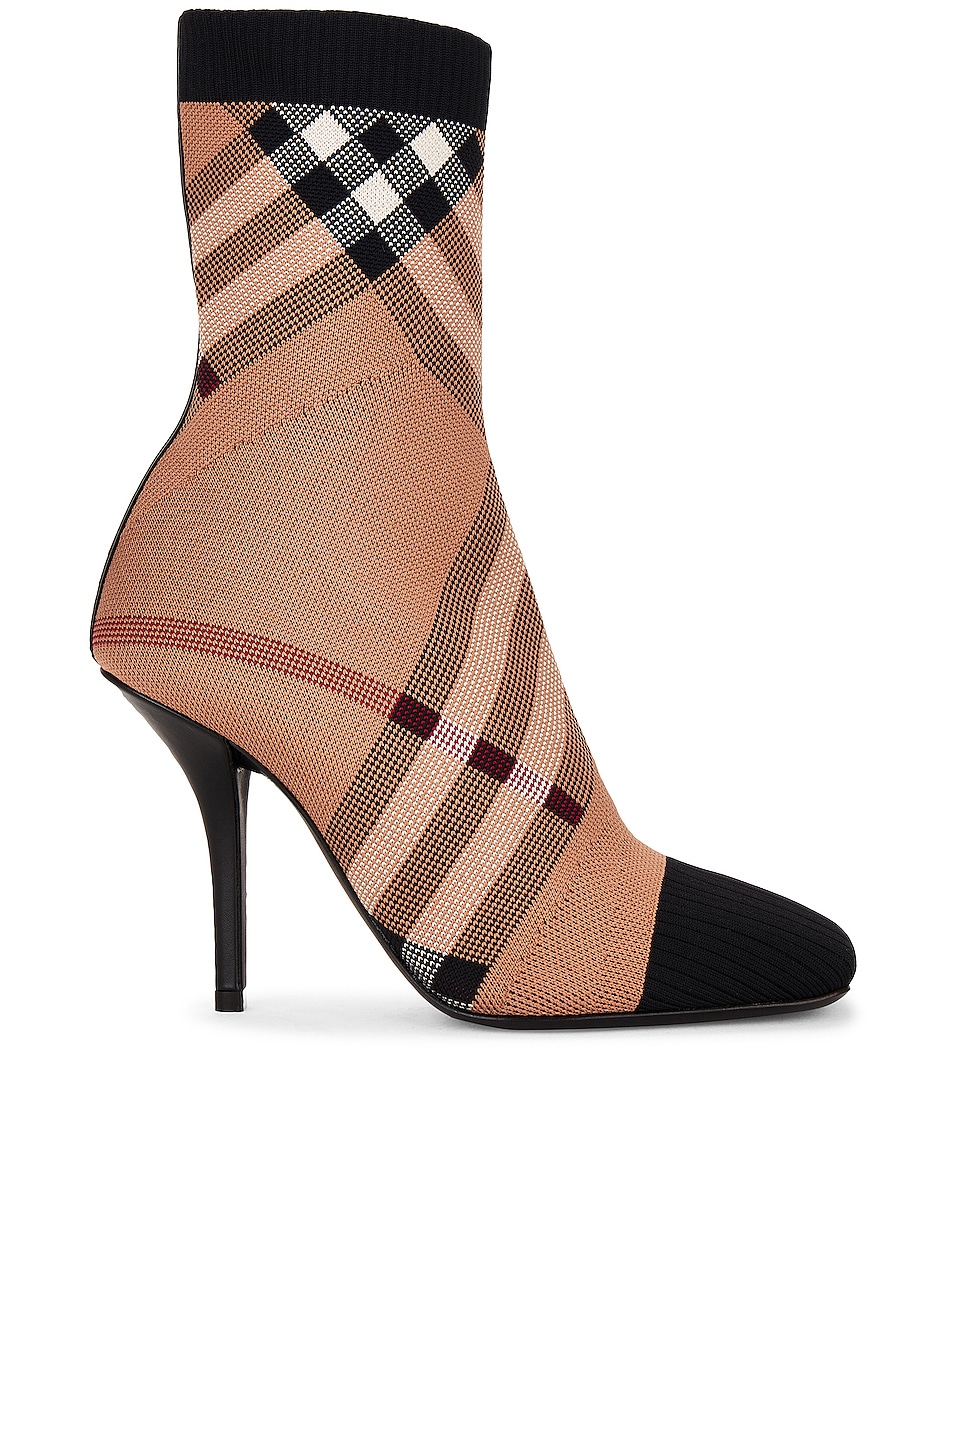 Image 1 of Burberry Dolman Check Ankle Boot in Birch Brown Check